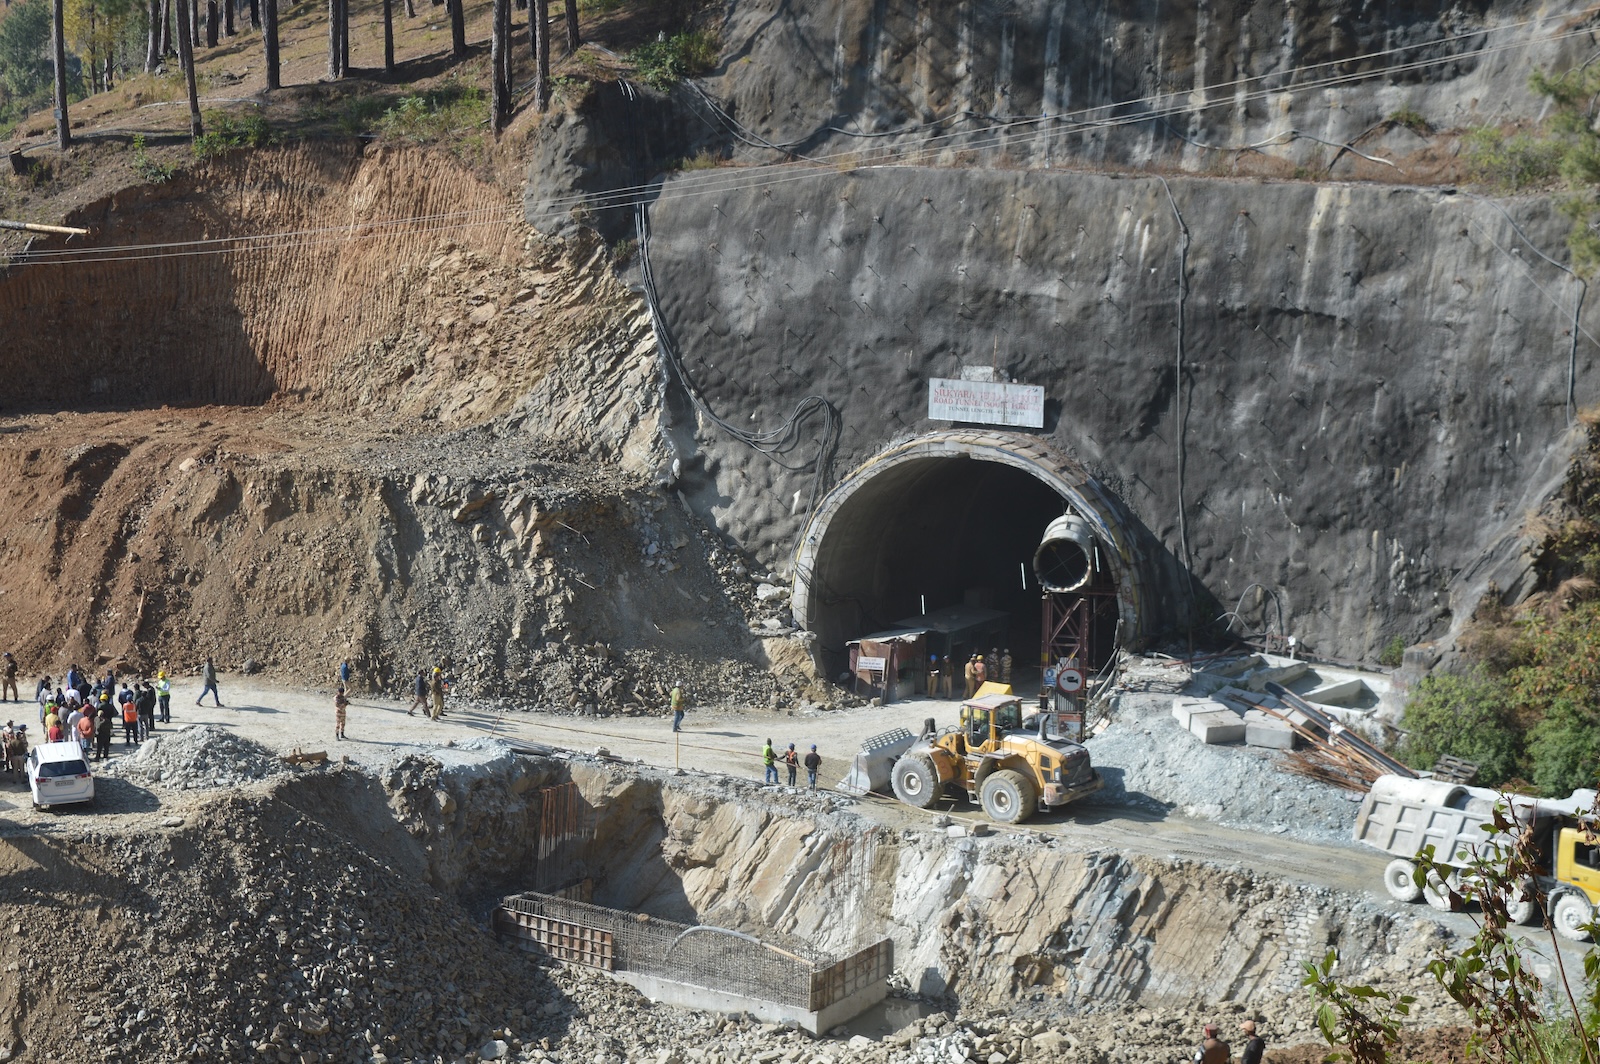 epa10981010 A general view of the tunnel as rescue workers continue to operate at the site of an under-construction tunnel following a collapse, on the Brahmakhal Yamunotri National Highway in Uttarkashi, India, 17 November 2023. The efforts to rescue 40 labourers trapped in an under-construction tunnel in Uttarkashi hit another roadblock after the new machine could not drill further and Col. Deepak Patil, head of the rescue operation indicated that equipment for a possible option 3 is already enroute as rescue workers already drilled up to 24 metres through the rubble but need to drill up to 60 metres to insert 800 mm and 900 mm diameter pipes till an escape passage is created said National Highways and Infrastructure Development Corporation Limited (NHIDCL).  EPA/ABHYUDAYA KOTNALA